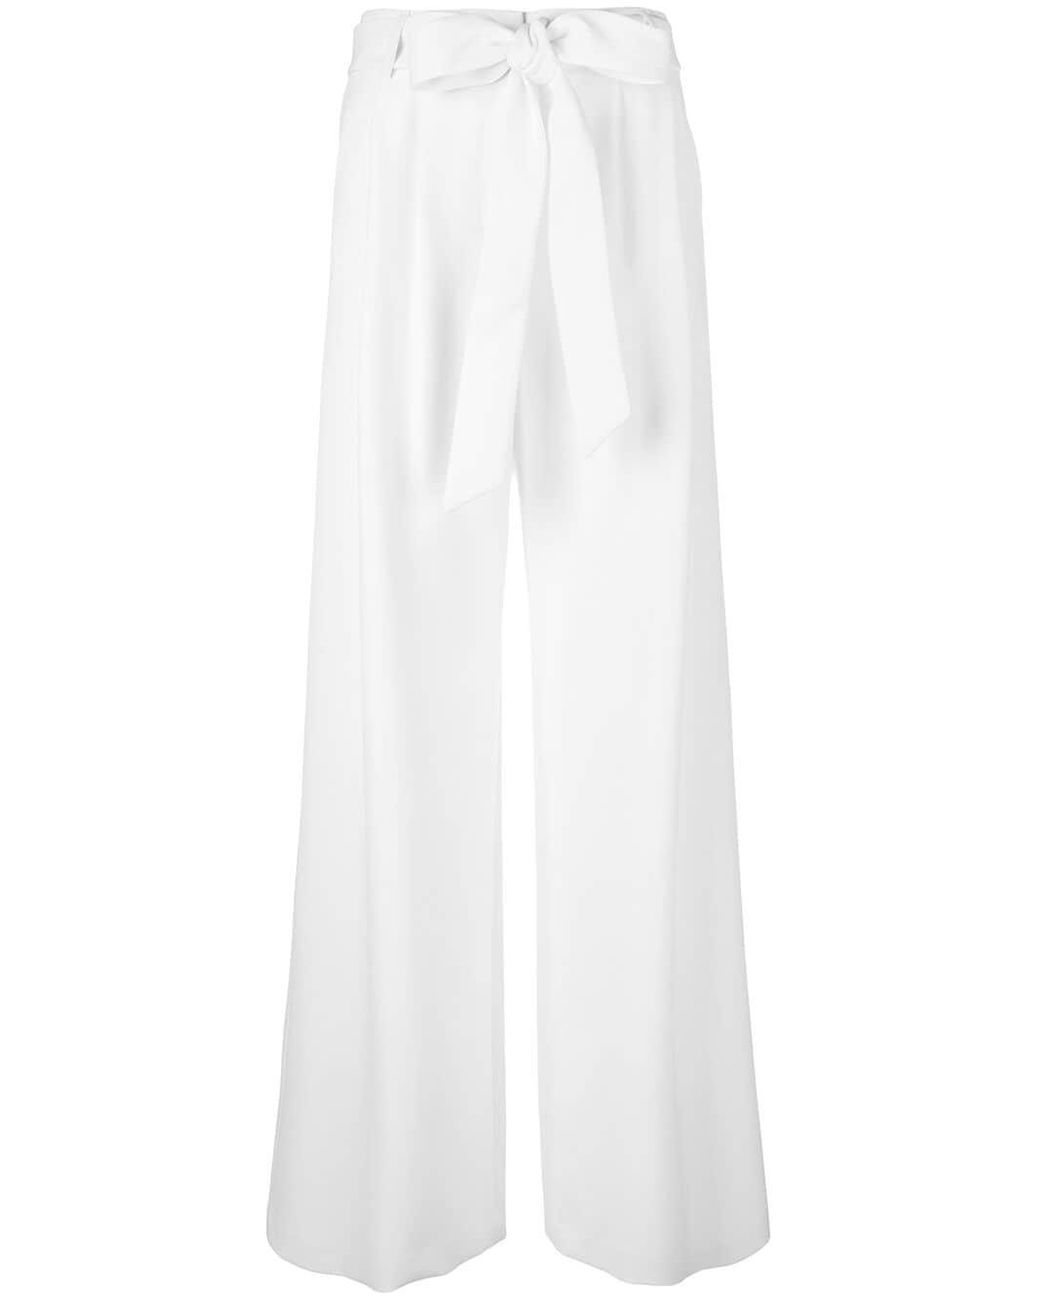 MILLY Synthetic Flared Trousers in White - Lyst